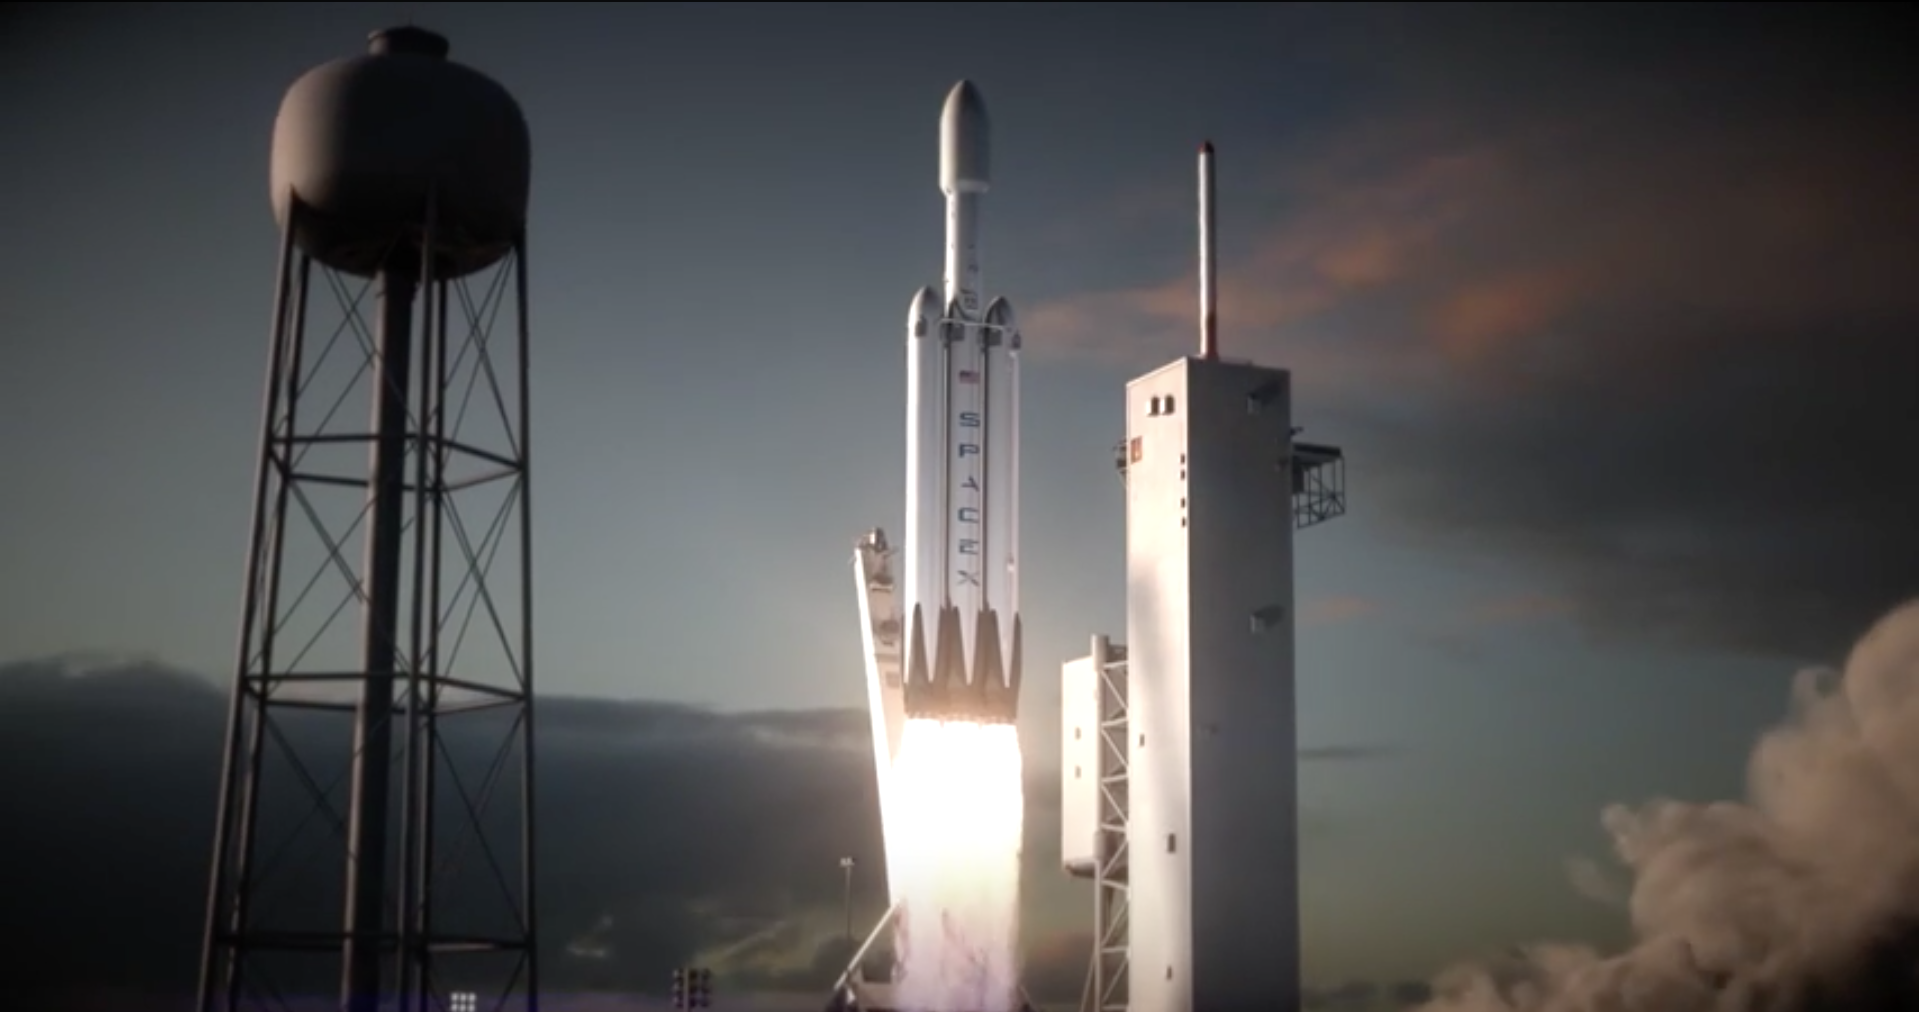 SpaceX Falcon Heavy Rocket Model   Pics about space